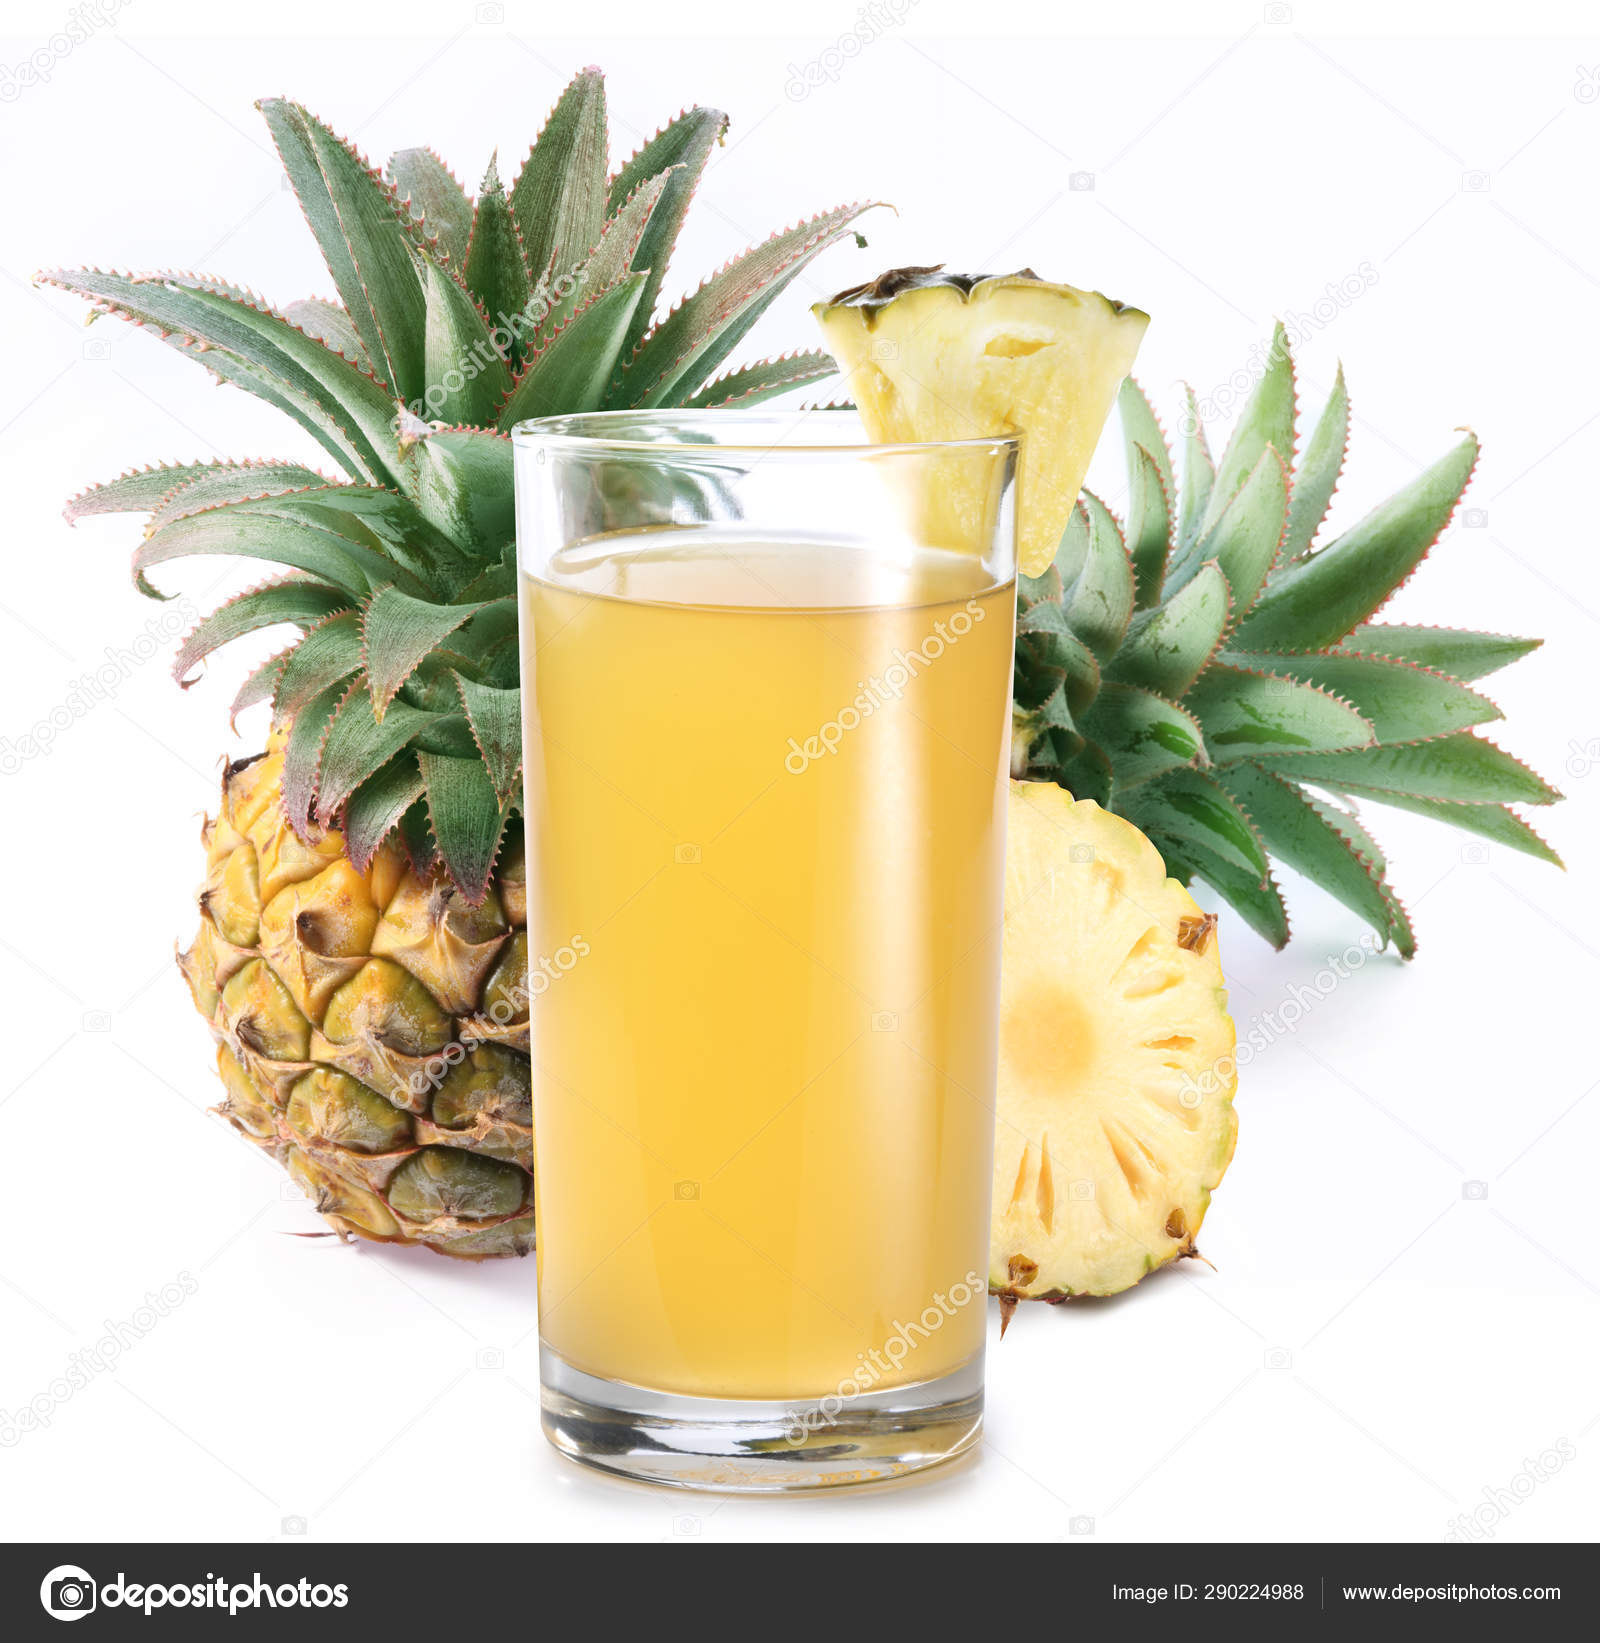 Pineapple Juice Kiwi, Fragrance Oil for Candles, Soap